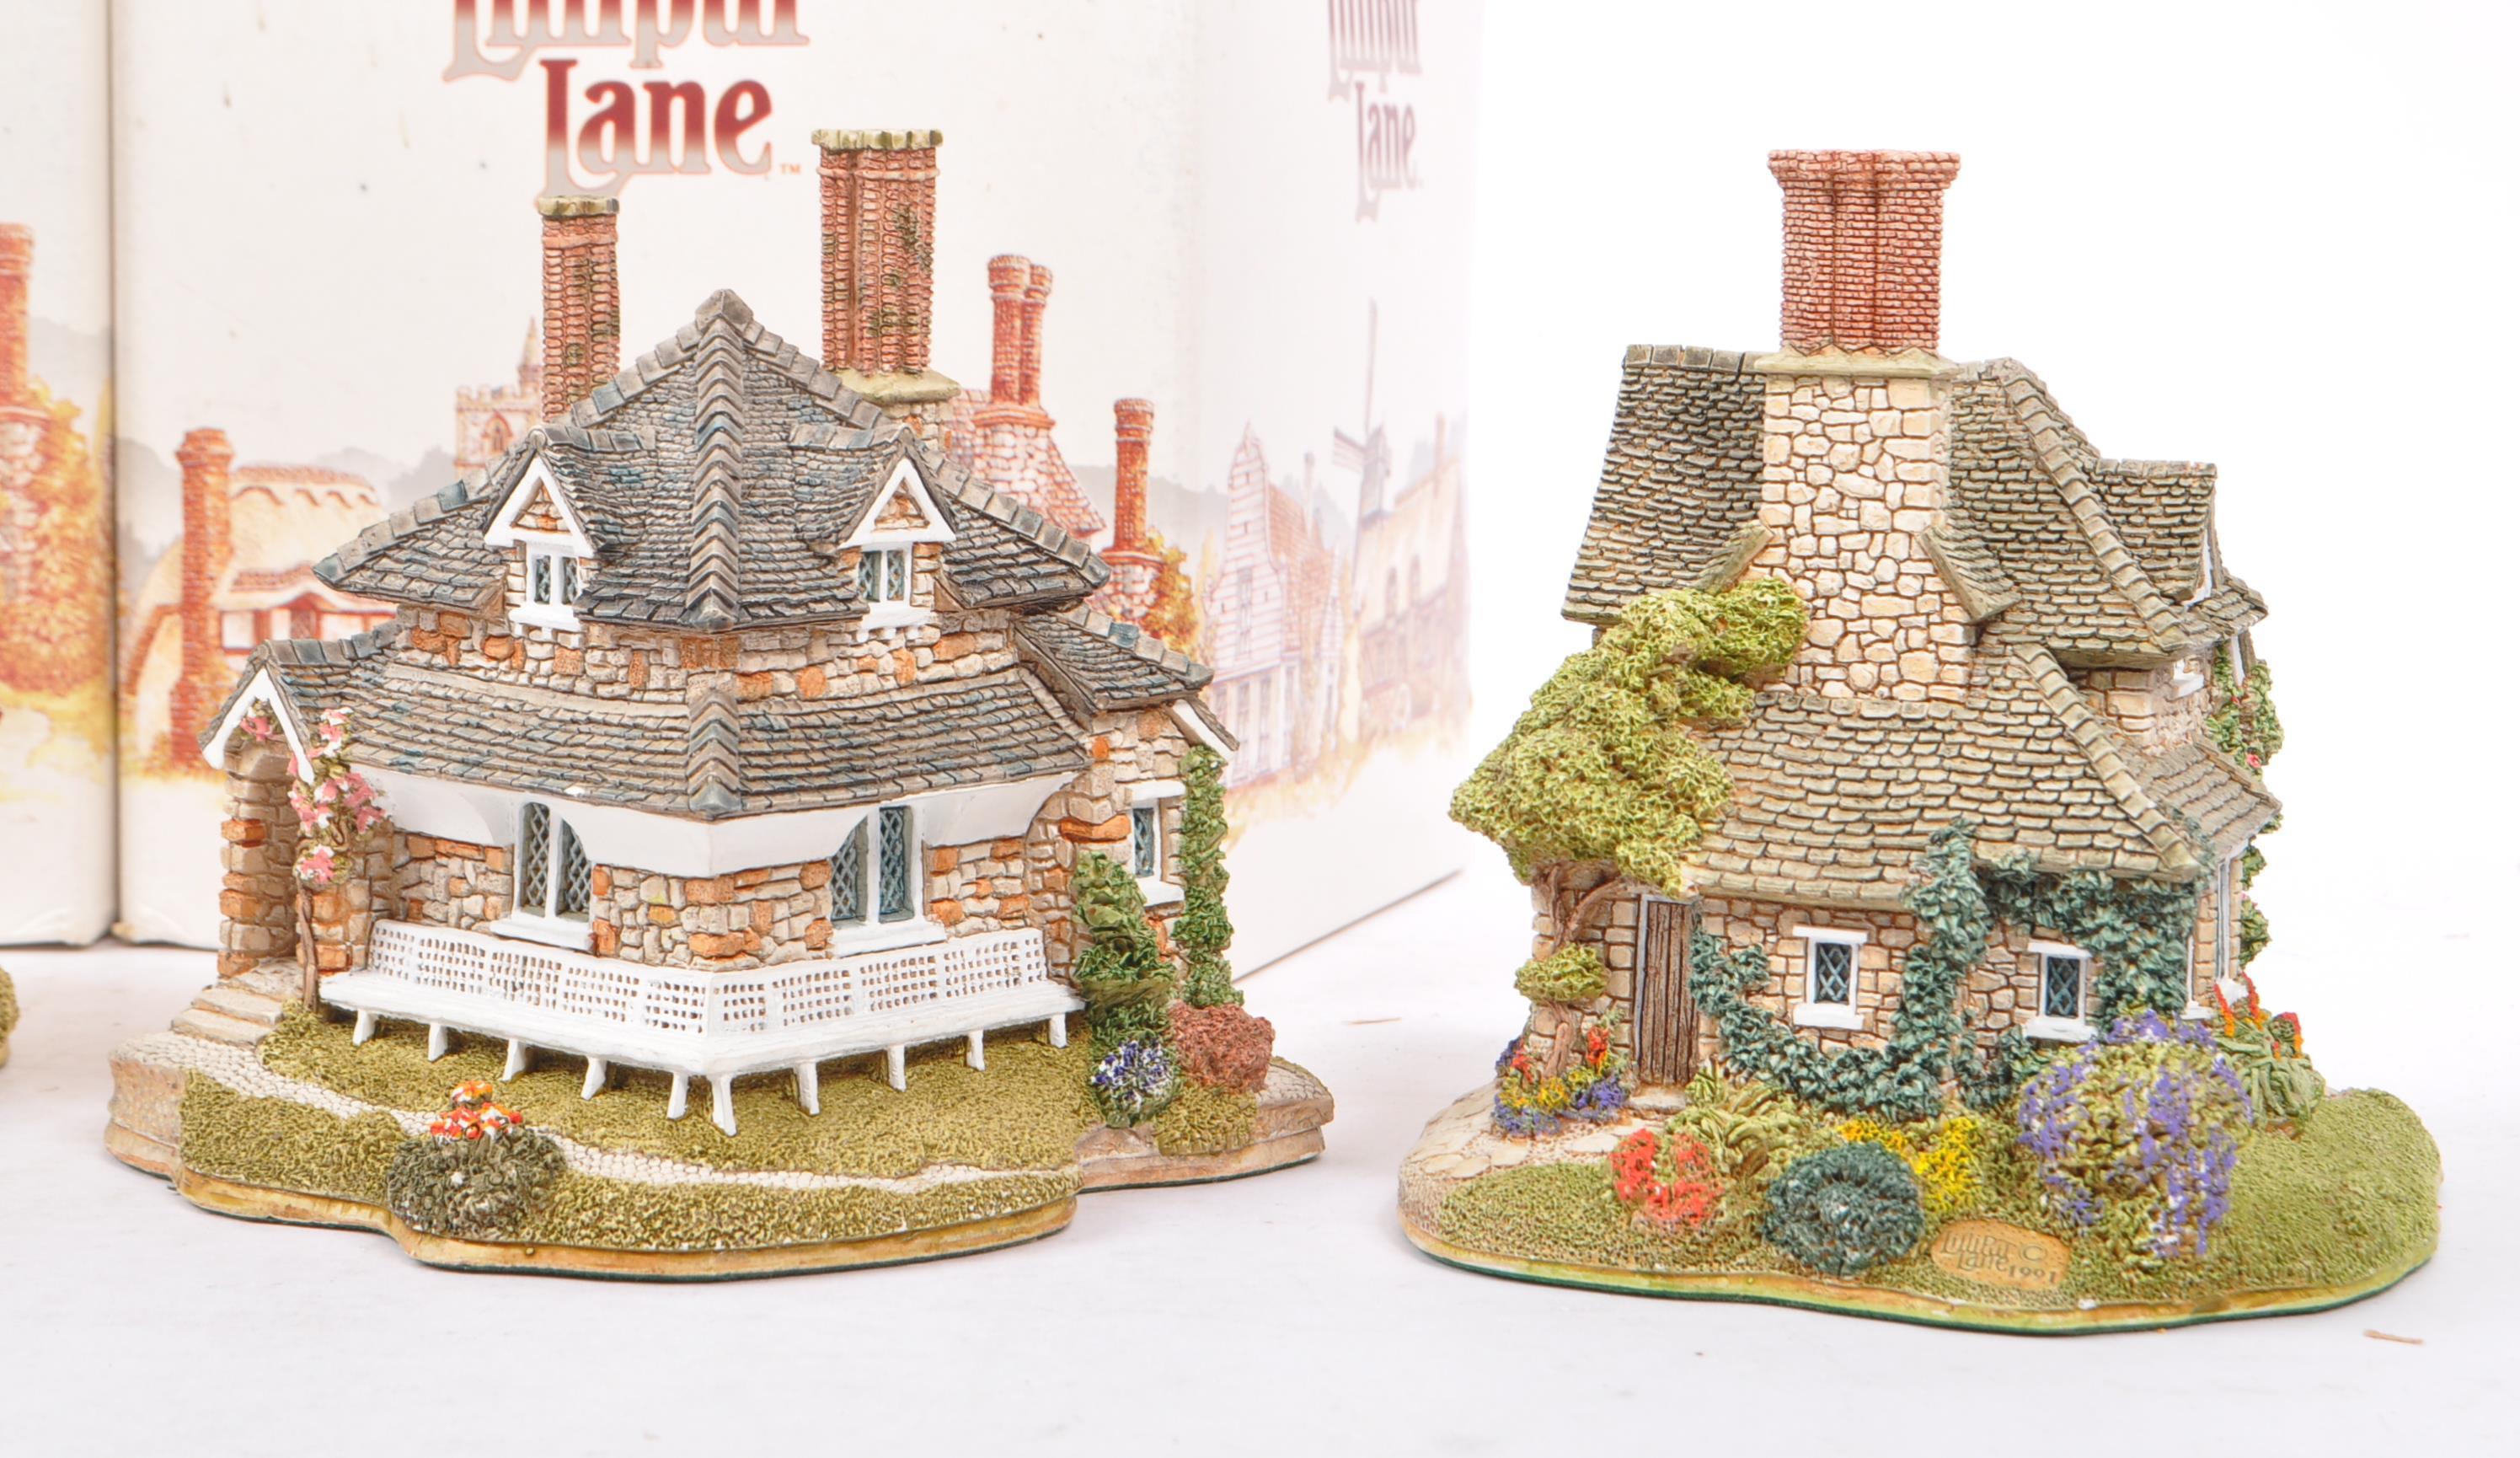 LILLIPUT LANE - COLLECTION OF HOUSE / COTTAGE RESIN FIGURINES - Image 6 of 9